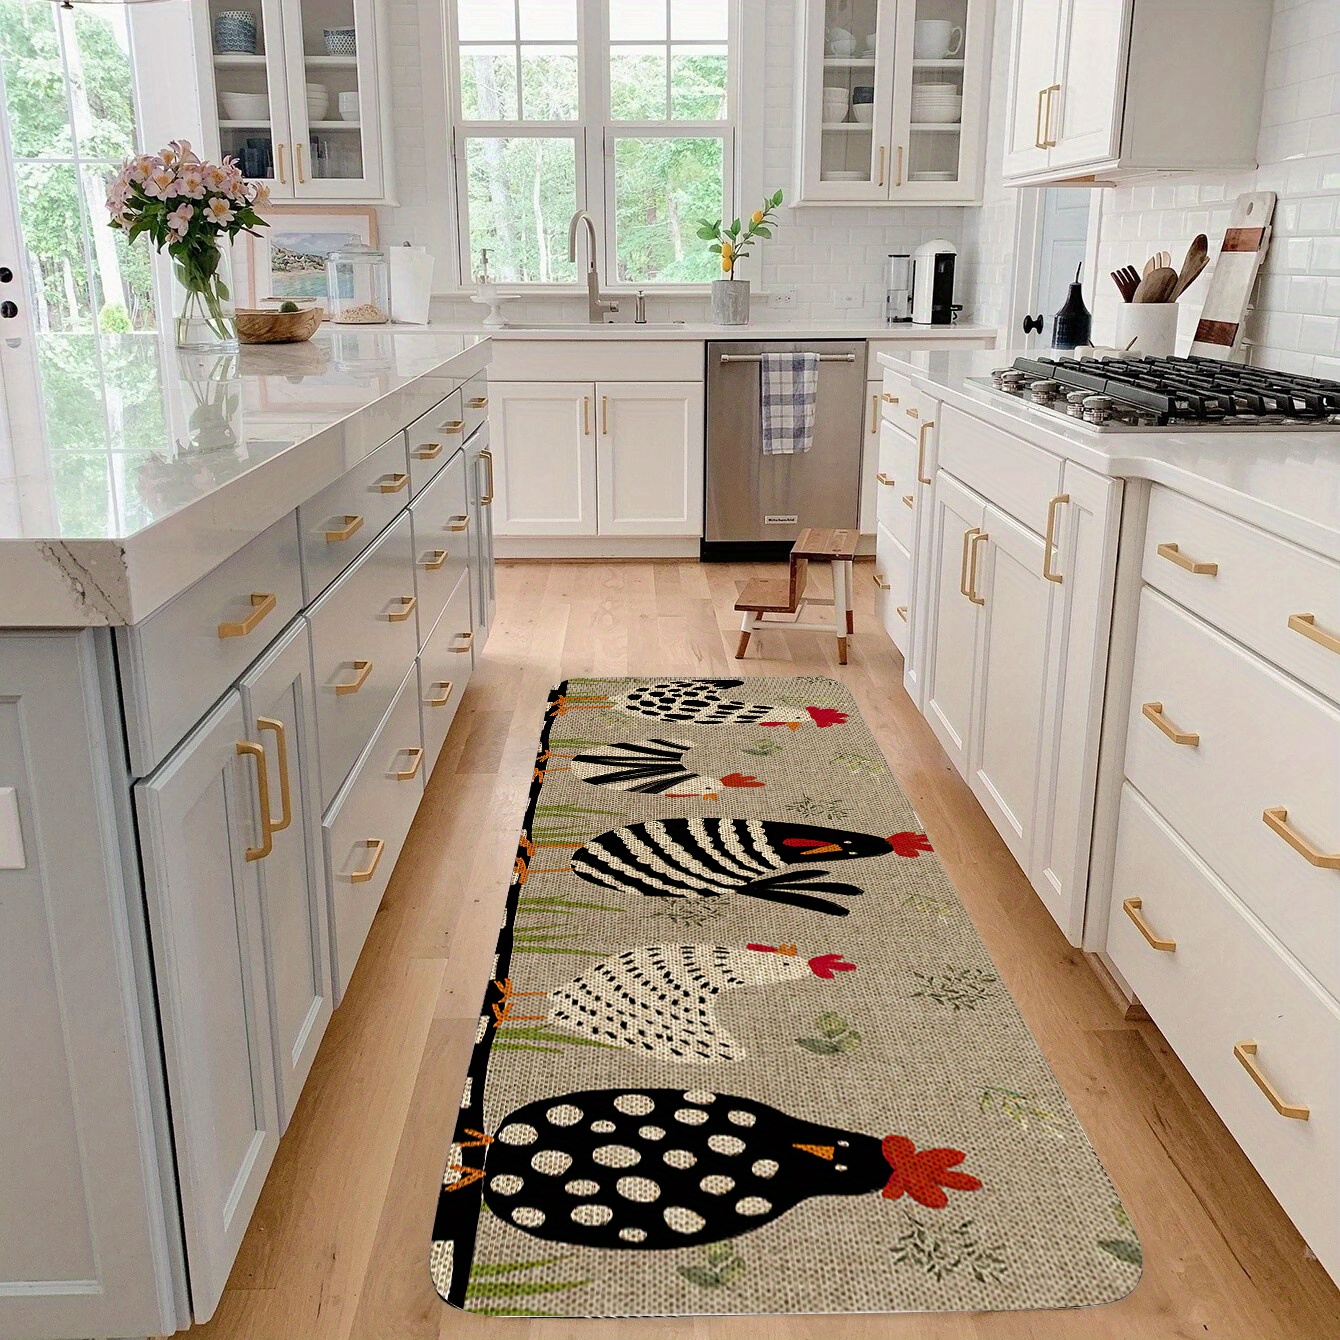  Kitchen Mat 2 Pieces, Bee Wreath Vintage Honeycomb Background Kitchen  Rugs and Mats Non Slip Runner Rug Washable Floor Mats for Kitchen Home 18  x 30 + 18 x 60 